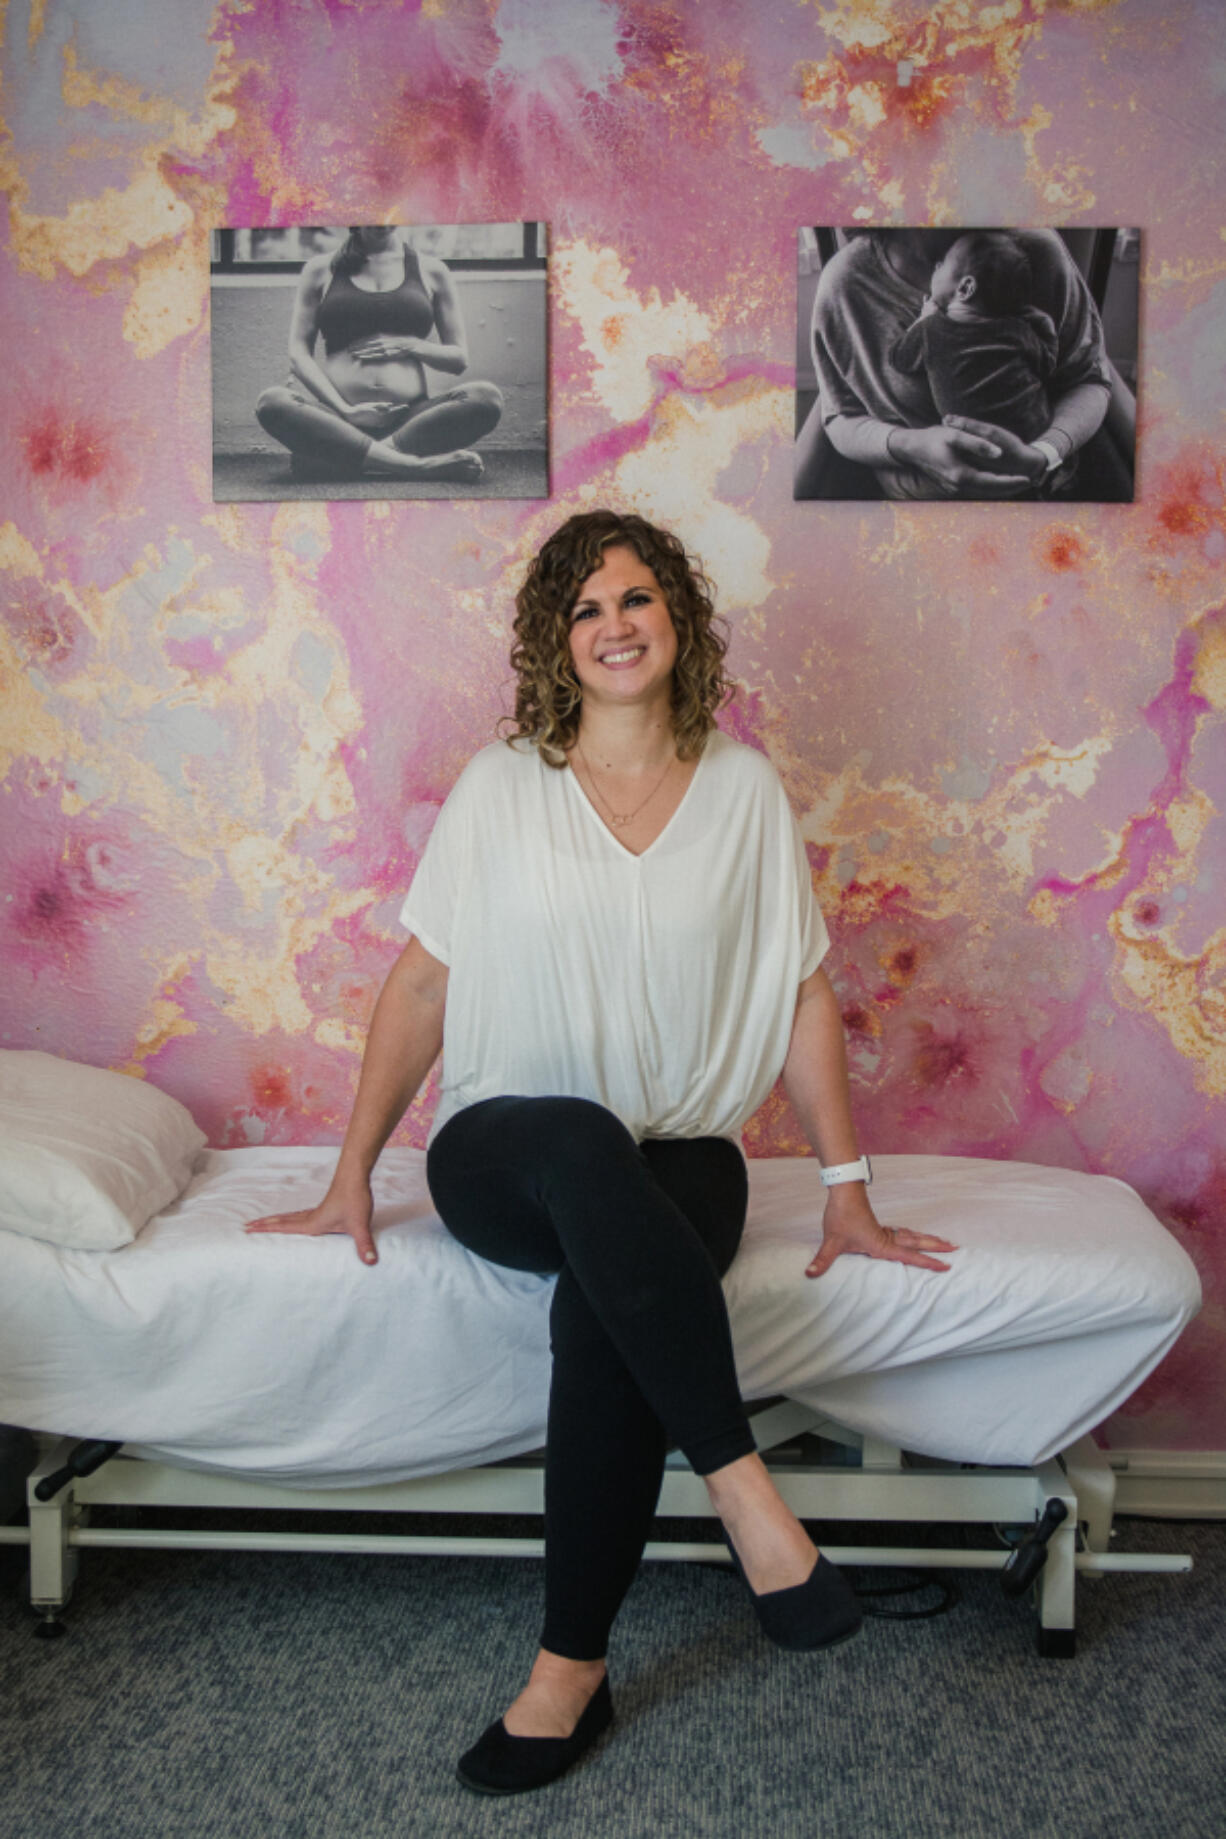 Christina Trautman is the owner of The Pelvic Floor Place, a reproductive health and physical therapy business in Felida.